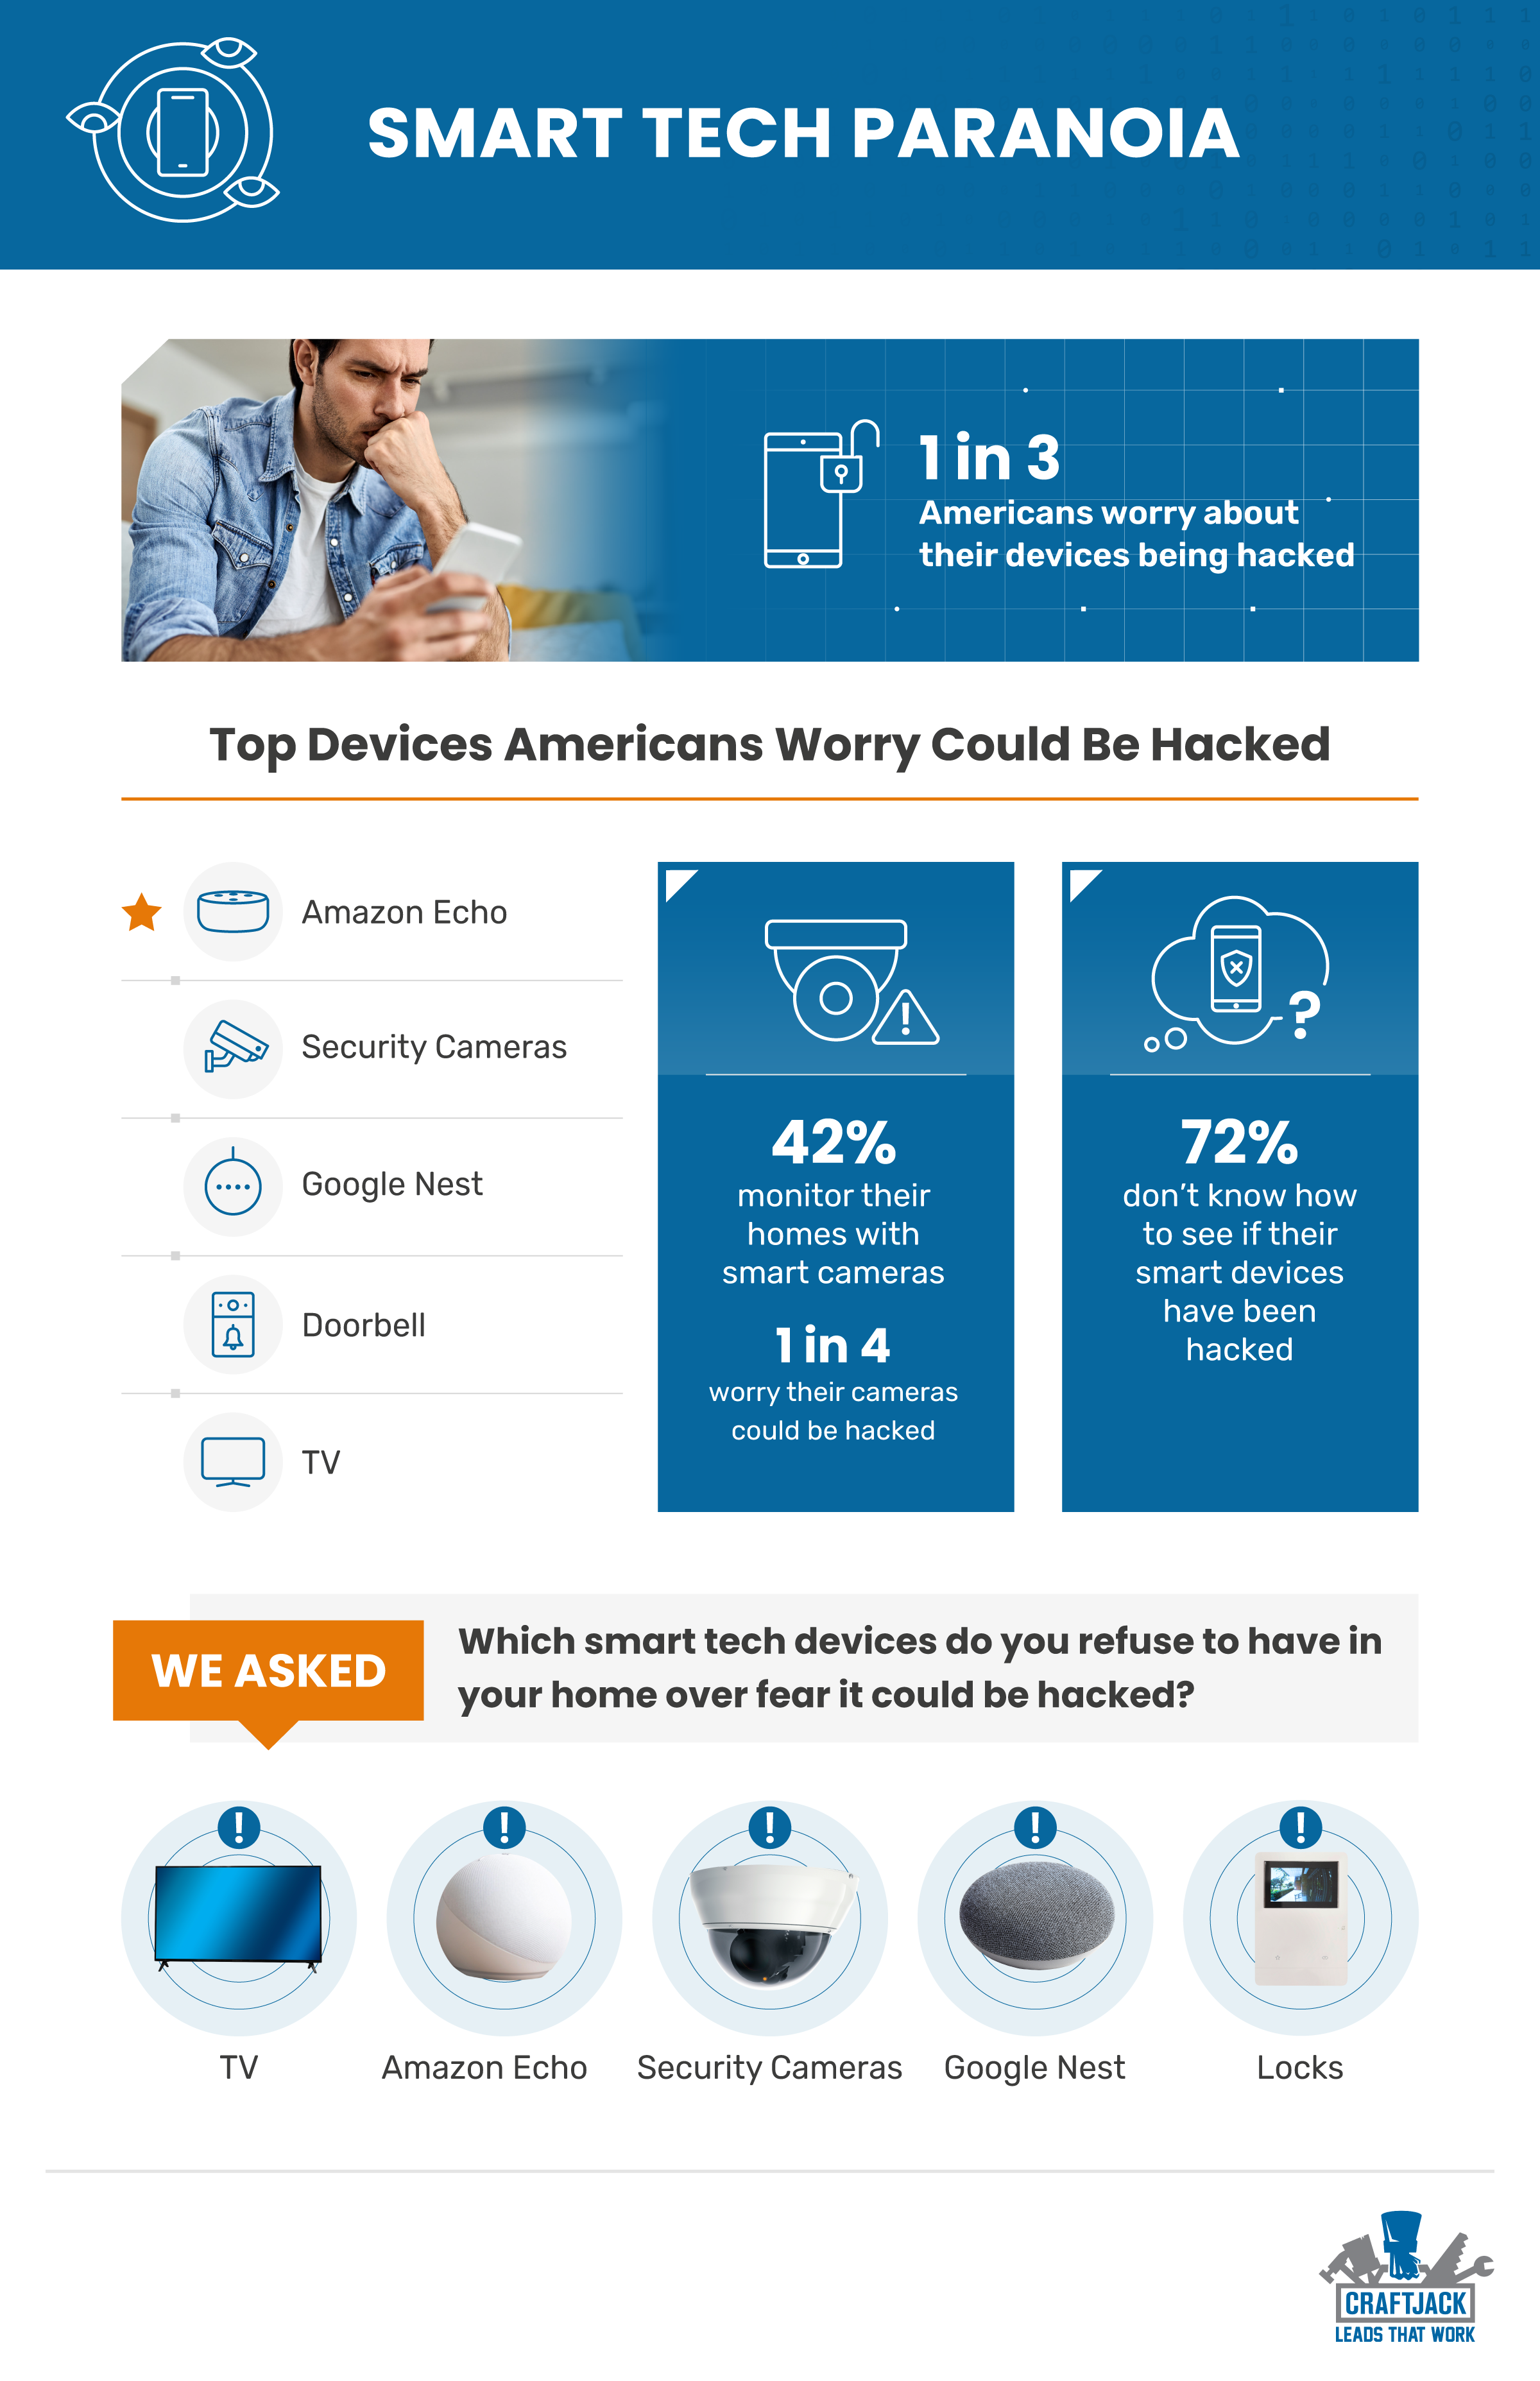 1 in 3 Americans worry about their devices being hacked